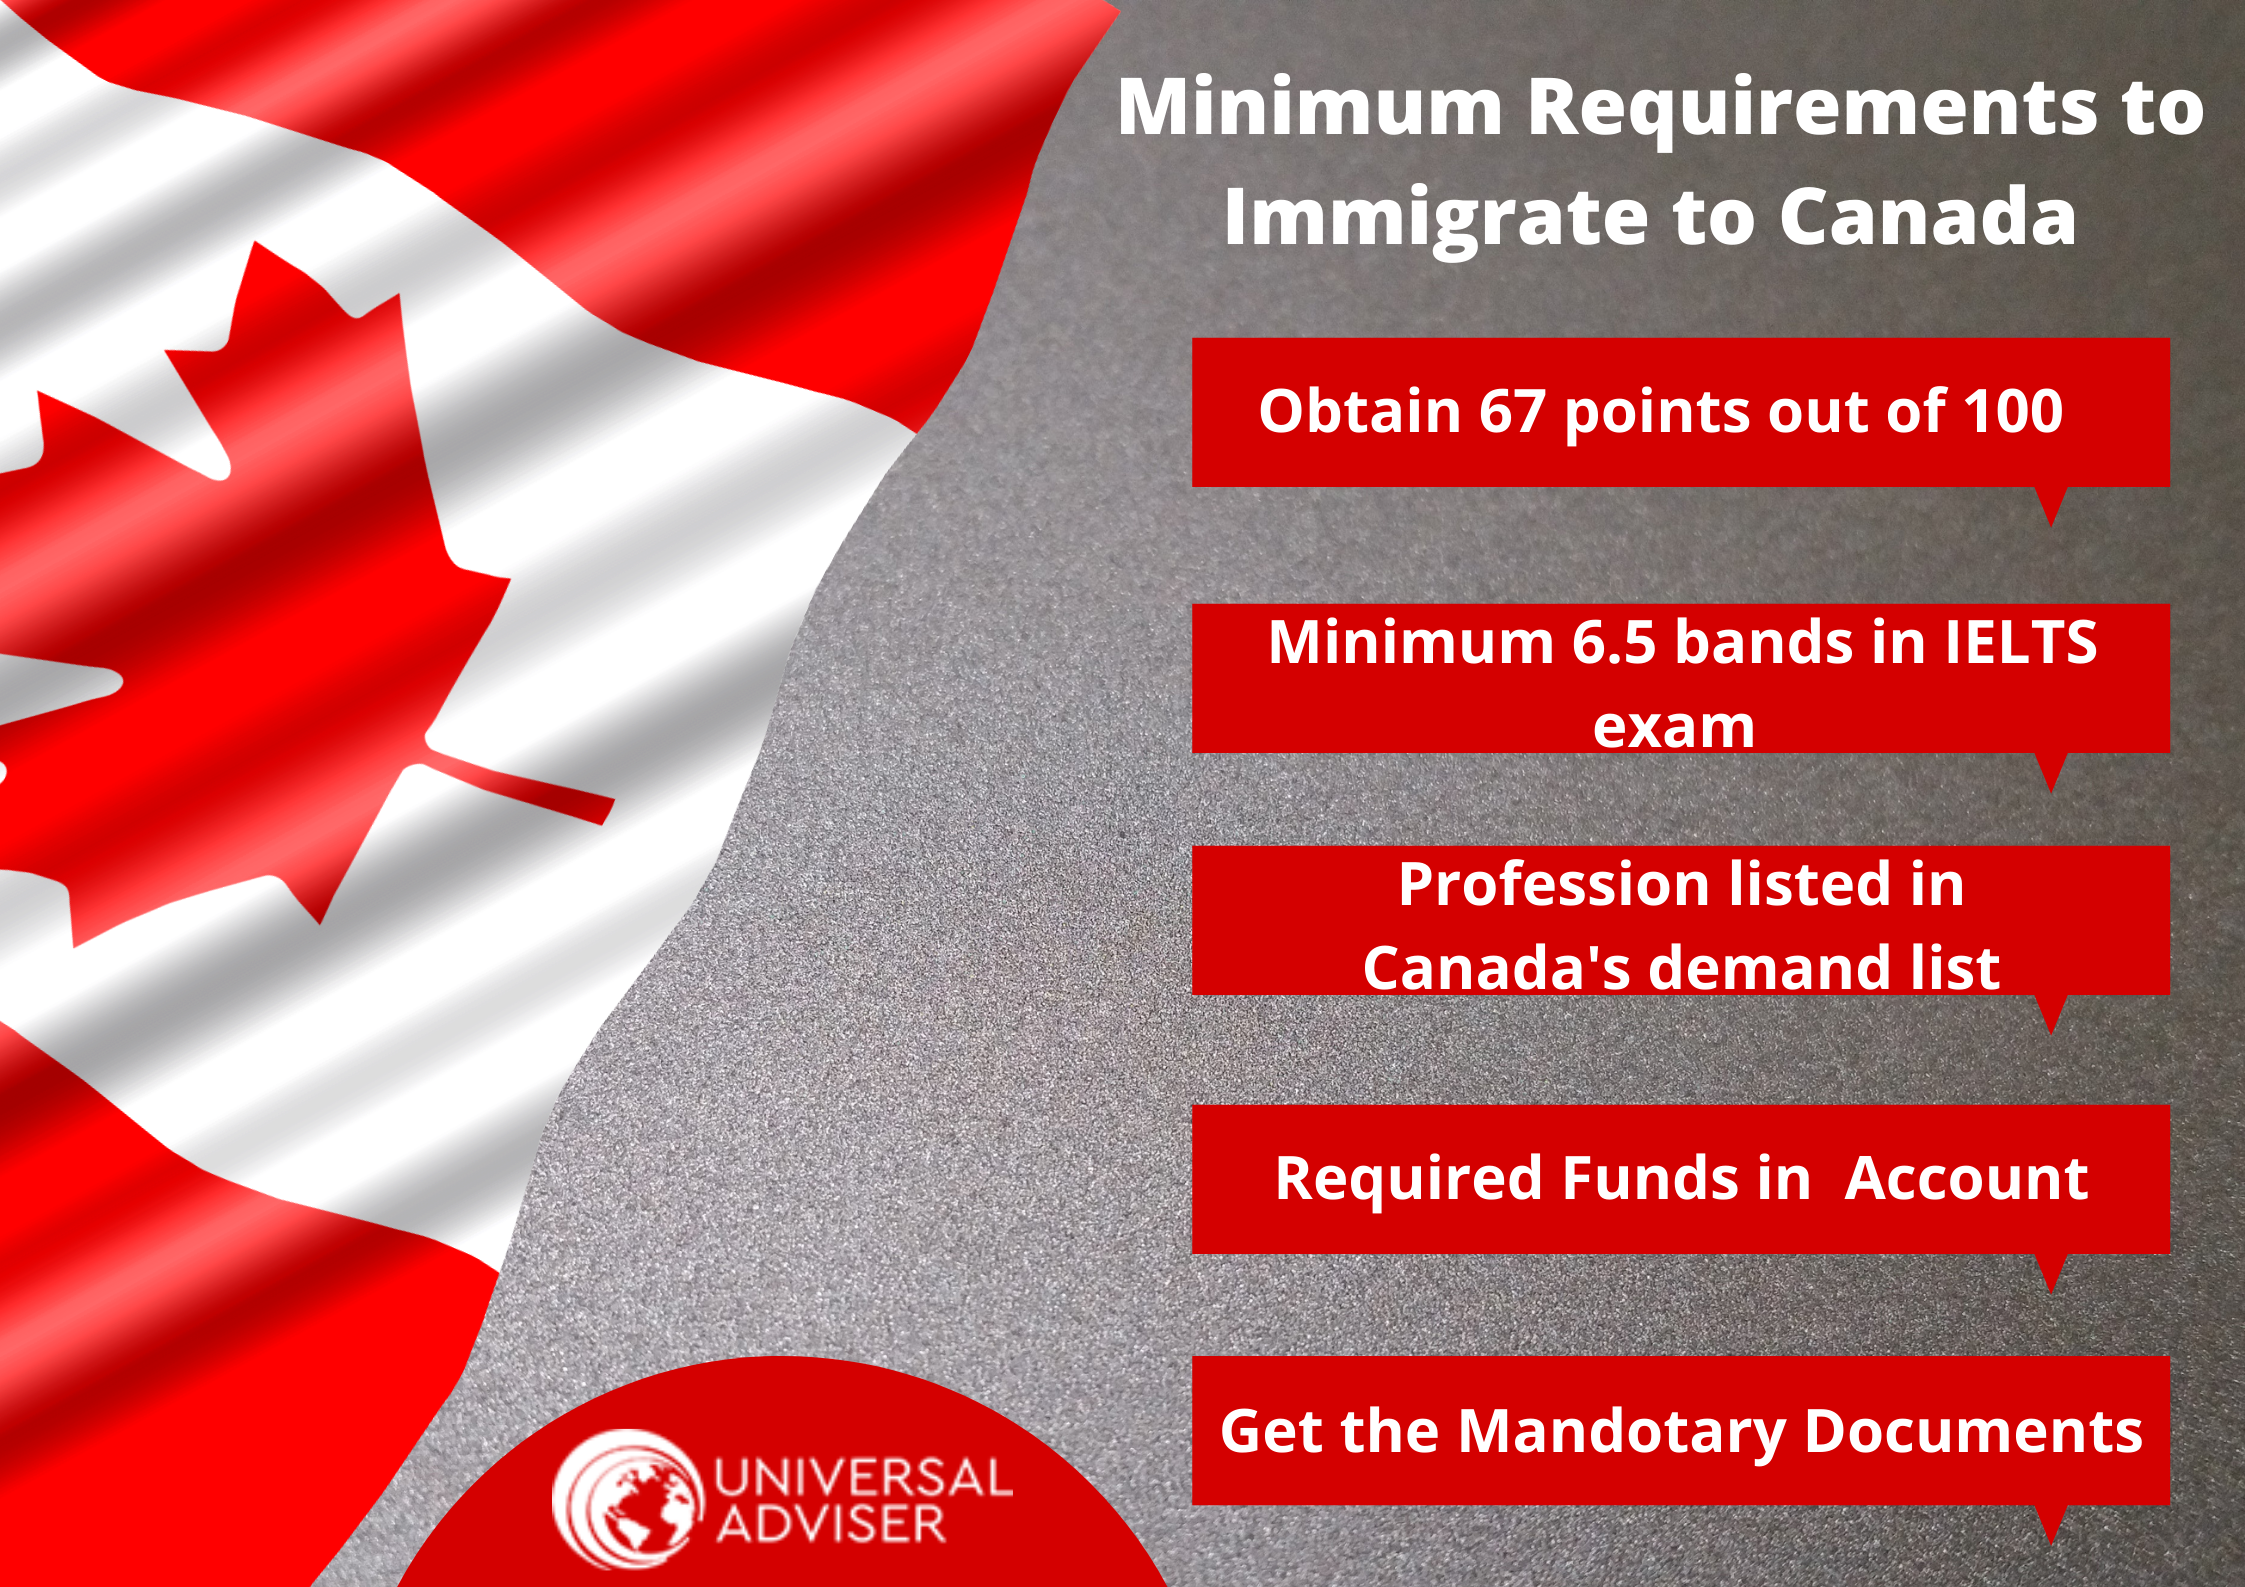 Minimum Requirements to Immigrate to Canada